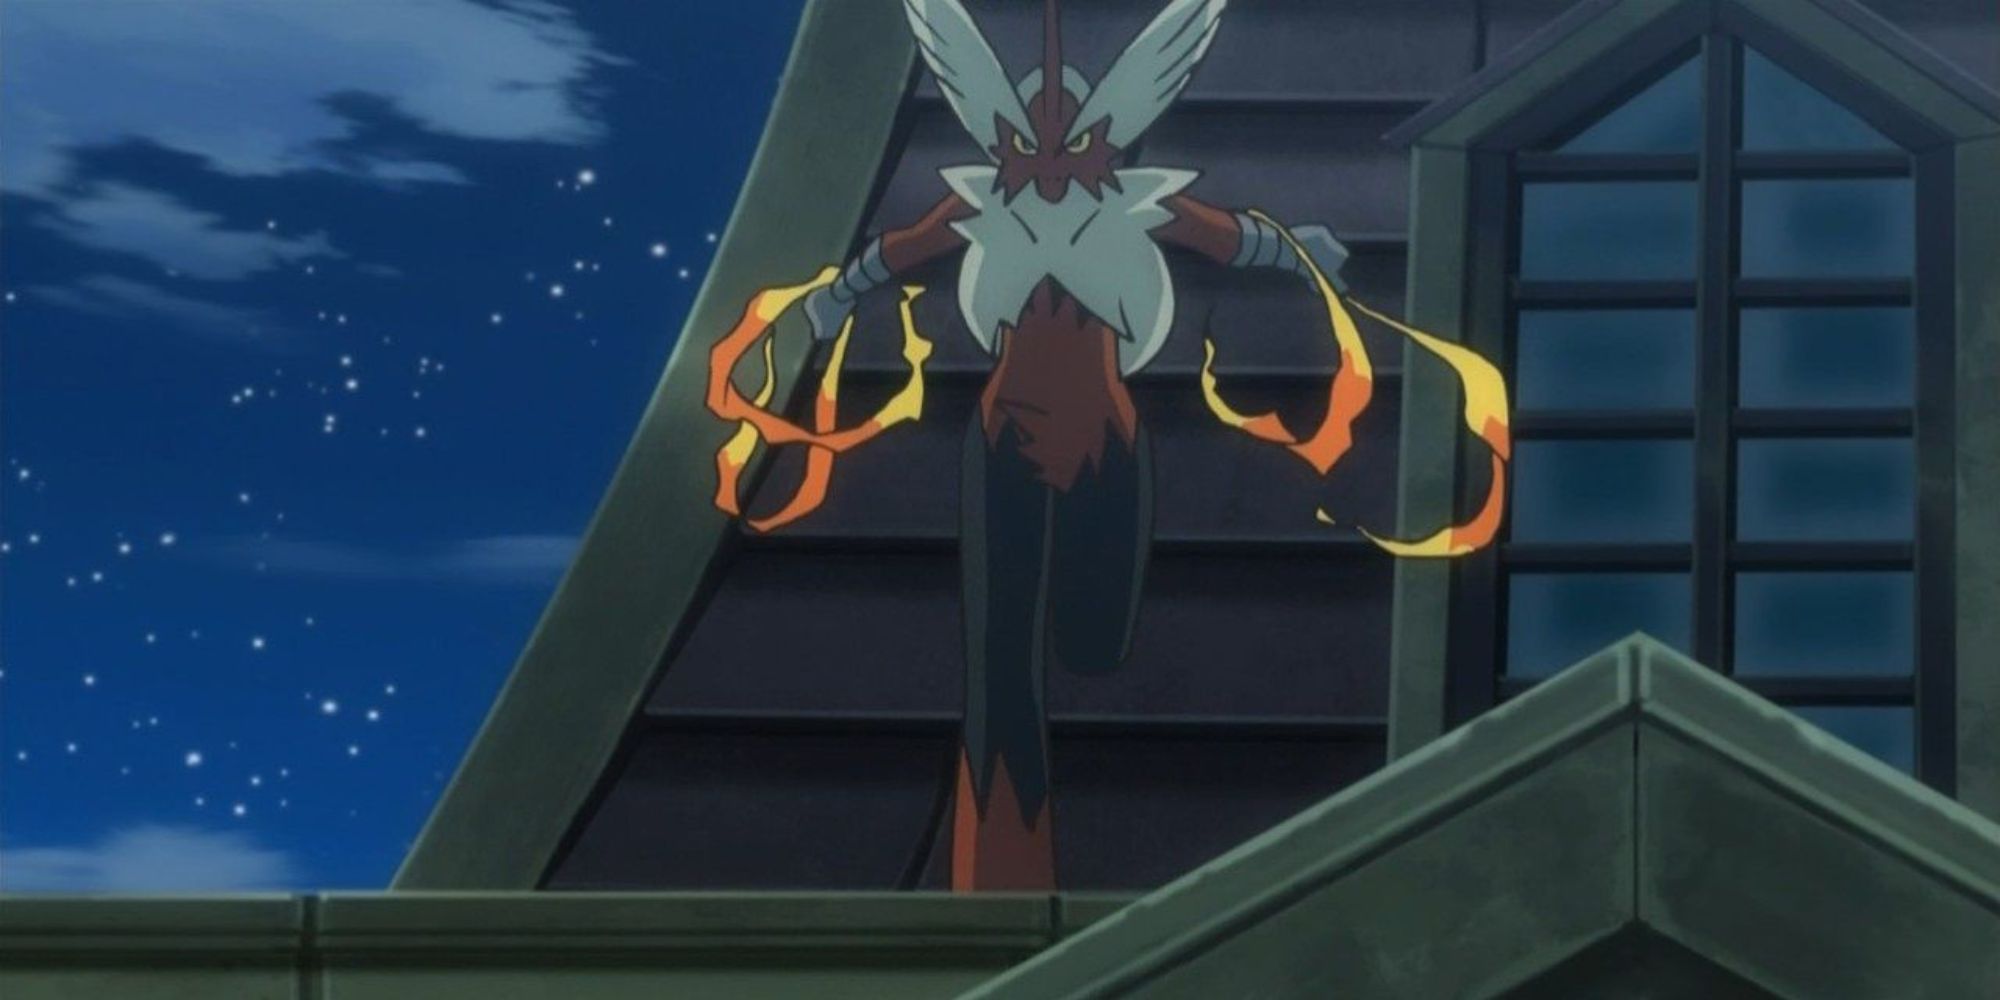 Mega Blaziken runs down the roof of a building at night in the Pokemon anime.